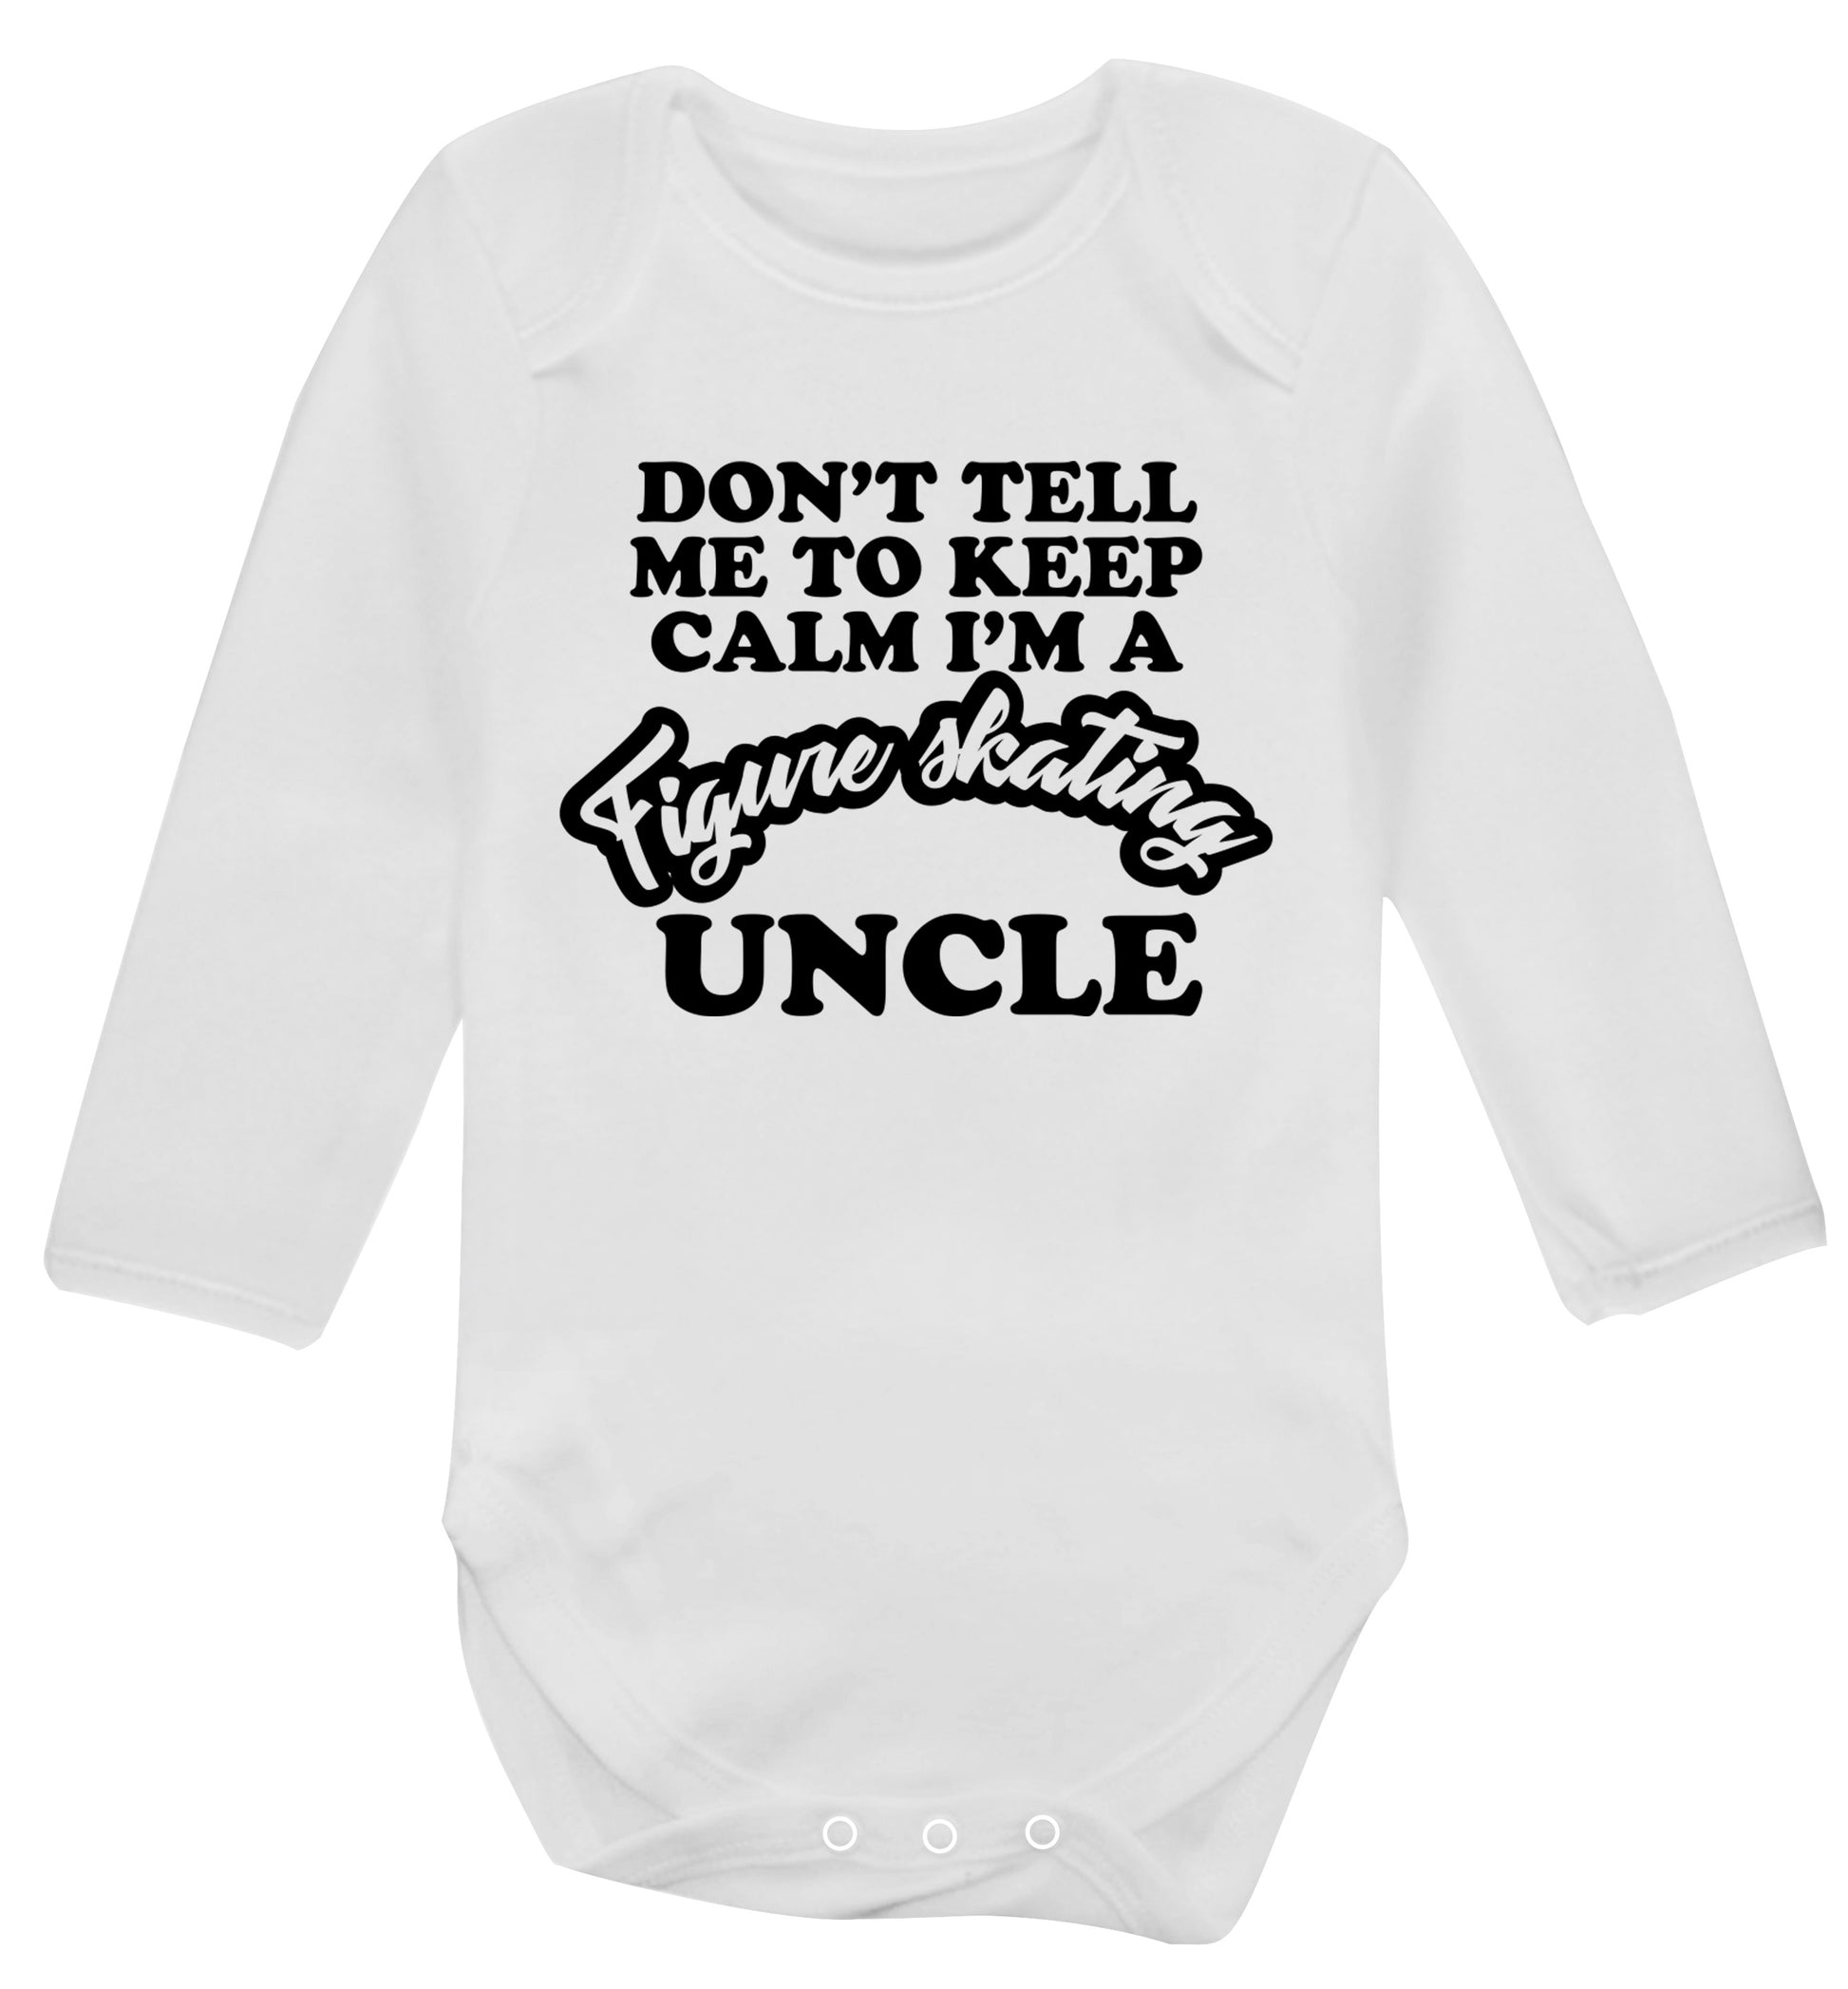 Don't tell me to keep calm I'm a figure skating uncle Baby Vest long sleeved white 6-12 months